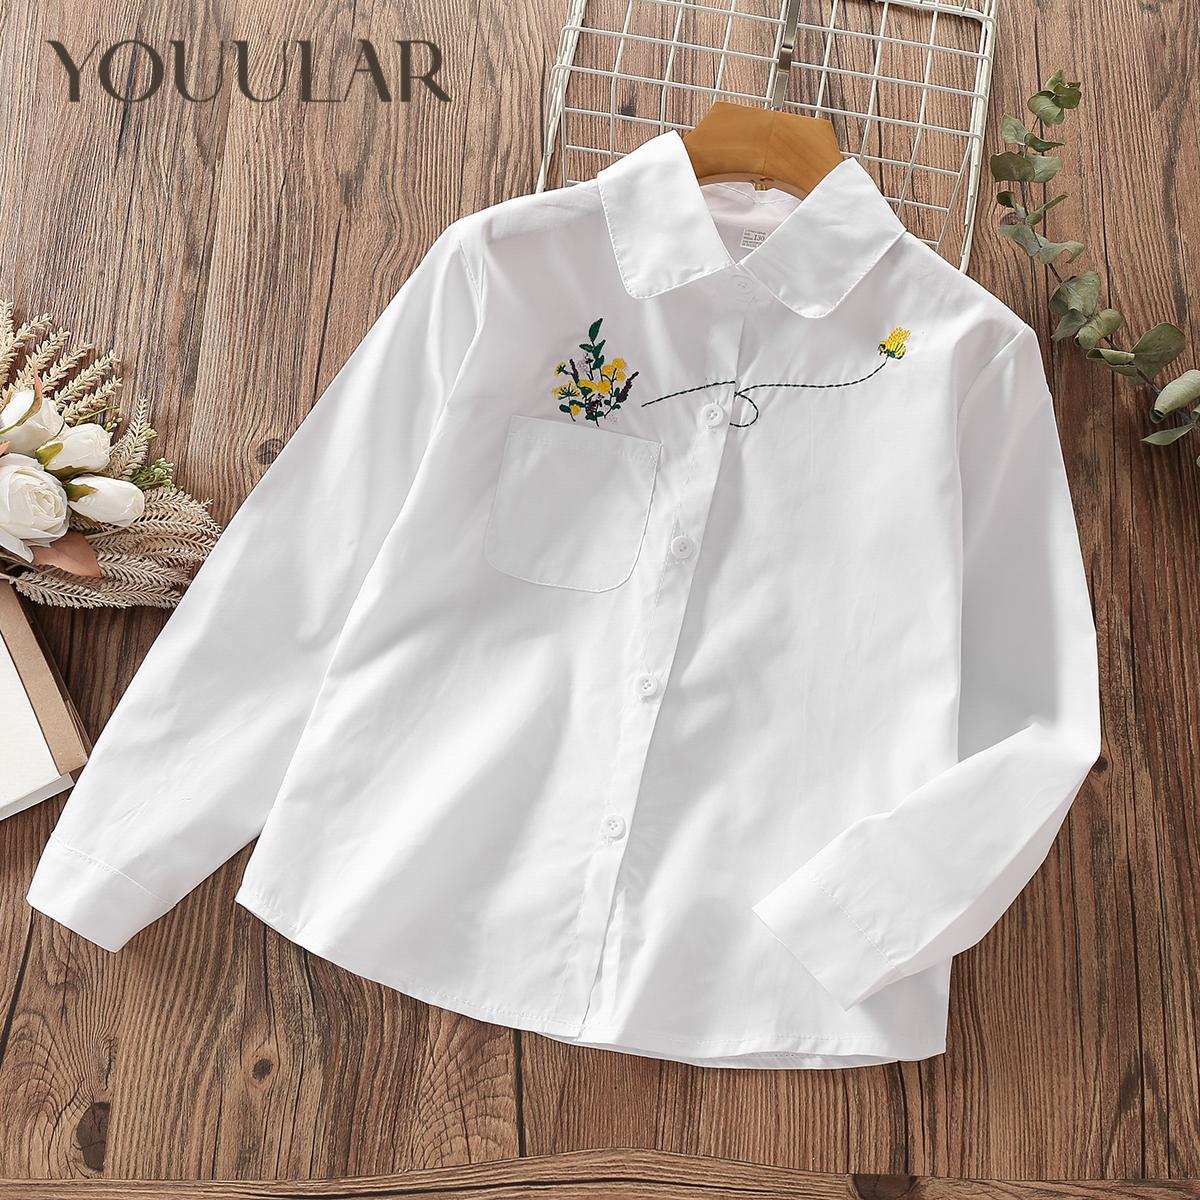 YOUULAR Teenagers School Shirt for Girl Blouse Cotton Tops Long Sleeve Lace Kids Clothes Spring Autumn Baby Children Clothing 6 7 10 14Y